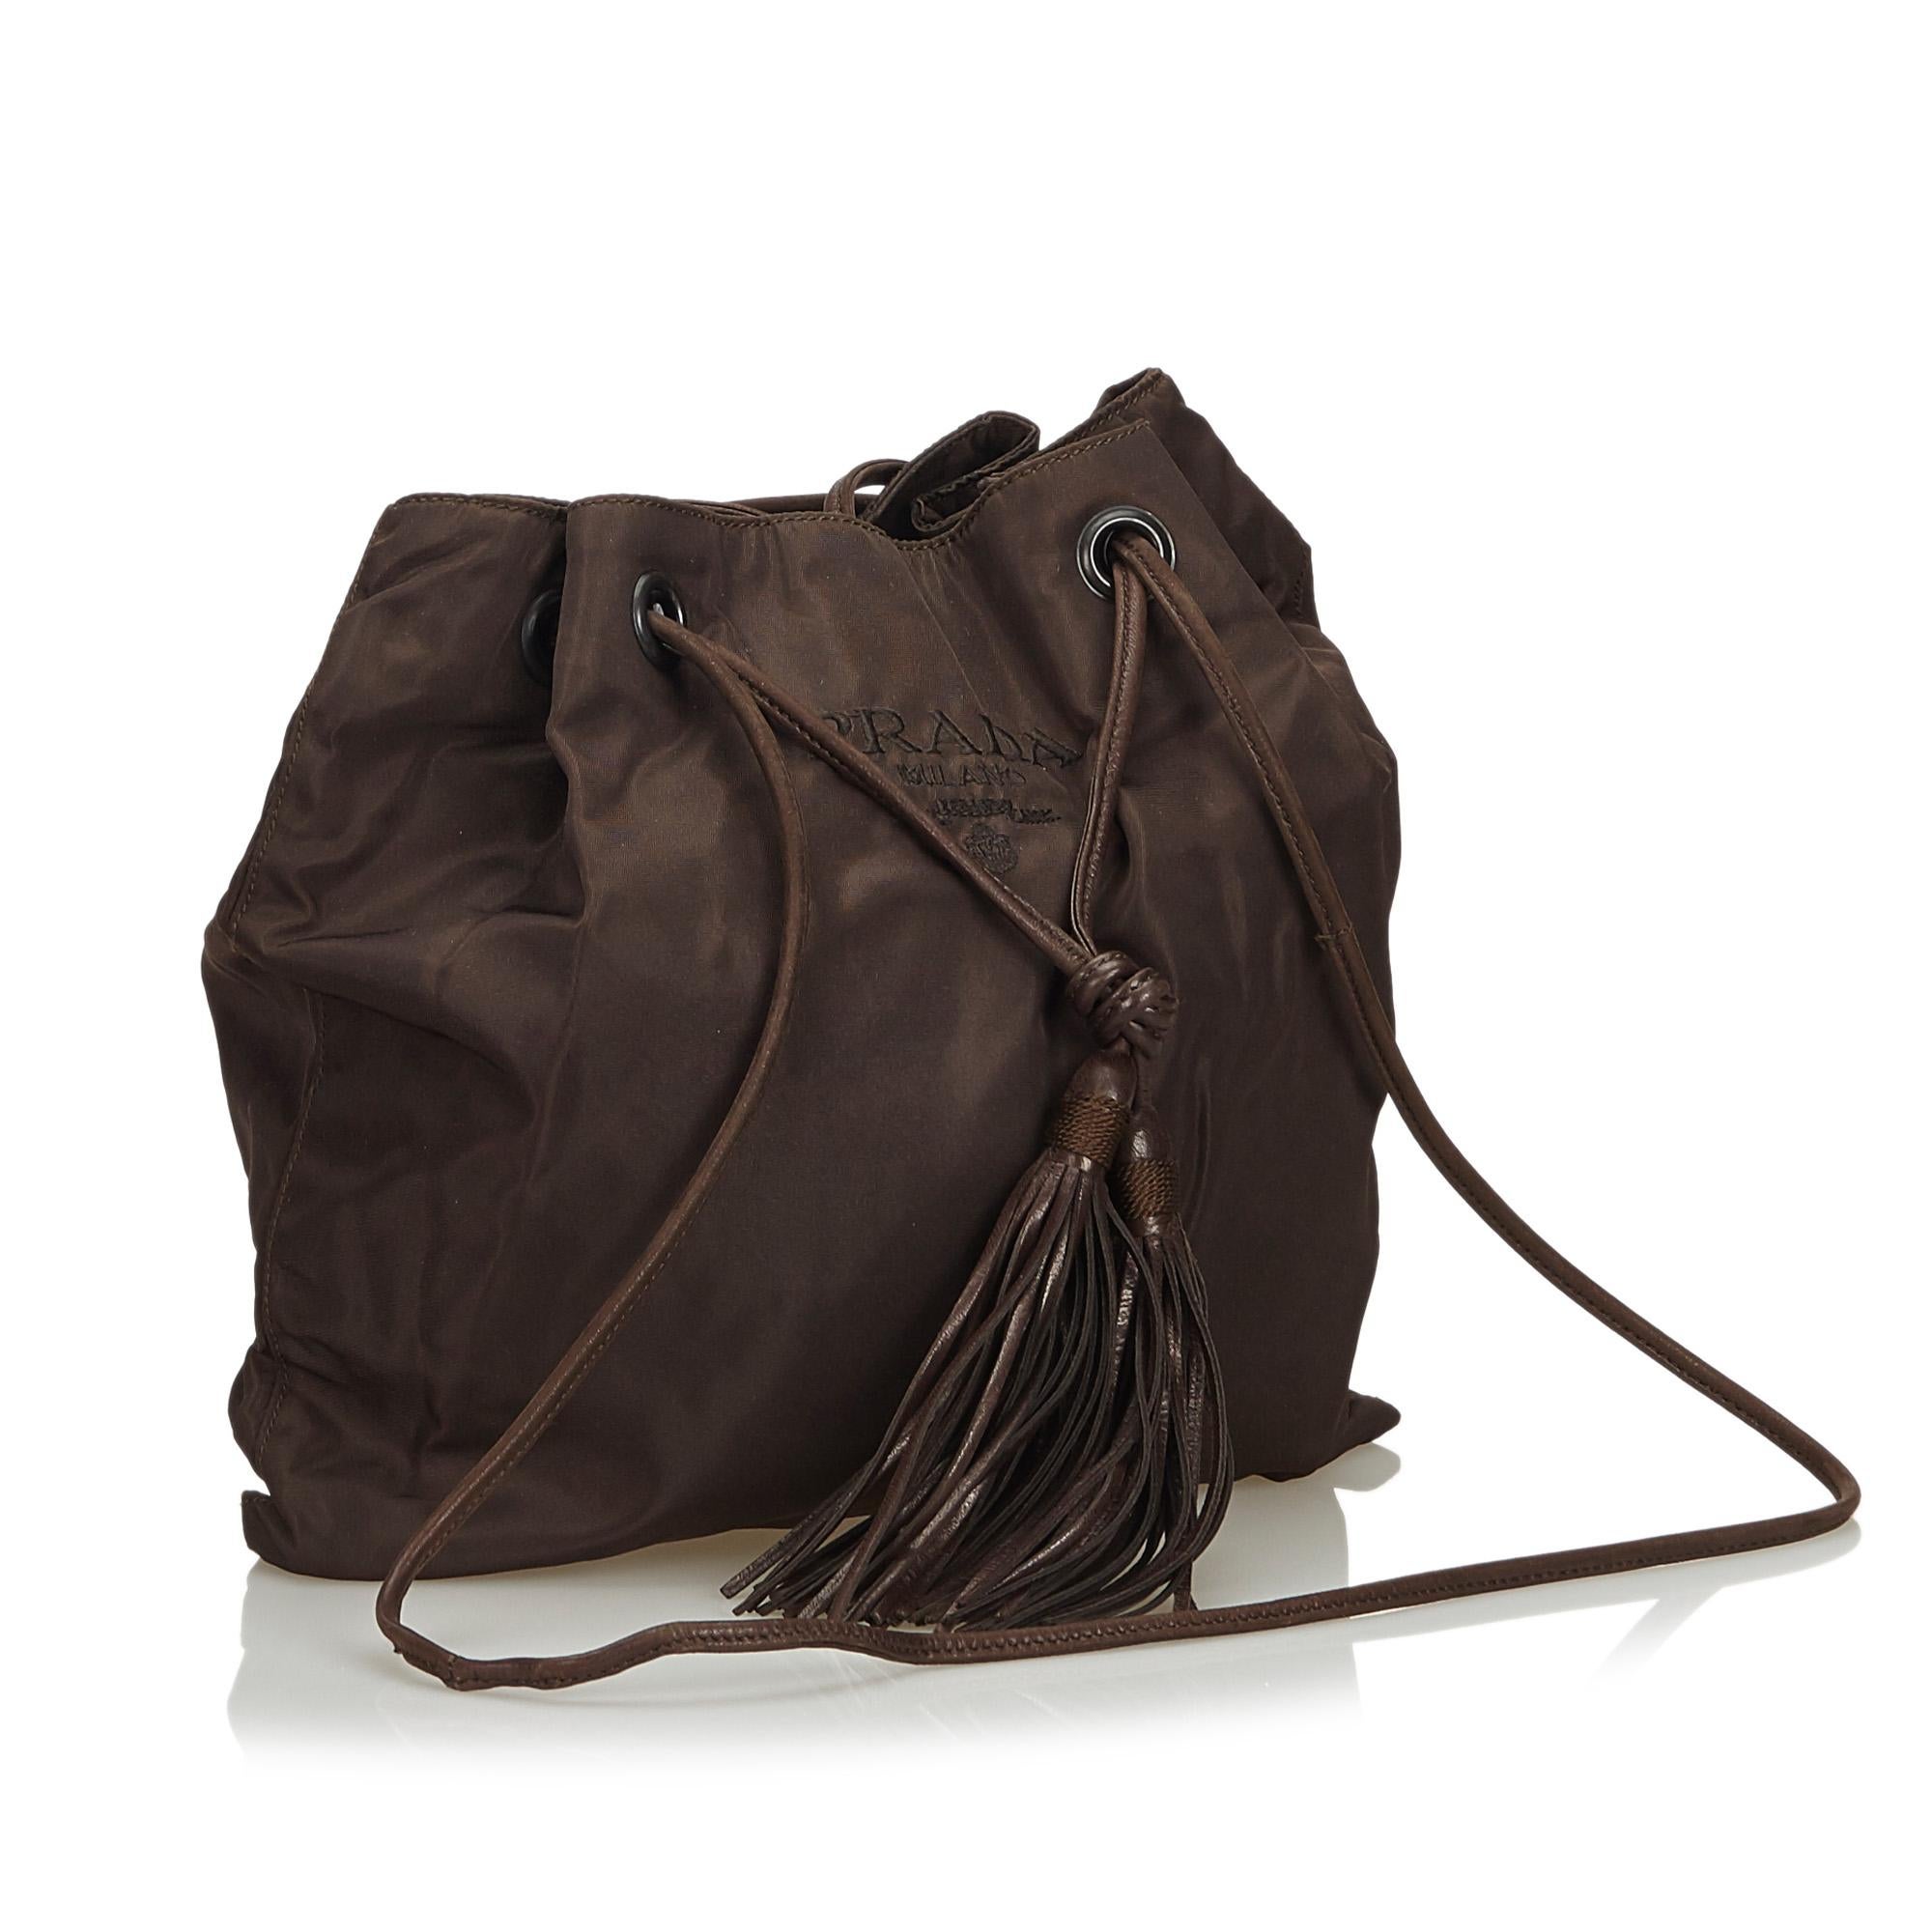 This crossbody bag features a nylon body, a leather tassel detail, rolled leather straps, a drawstring closure, and an interior zip pocket. It carries as B+ condition rating.

Inclusions: 
This item does not come with